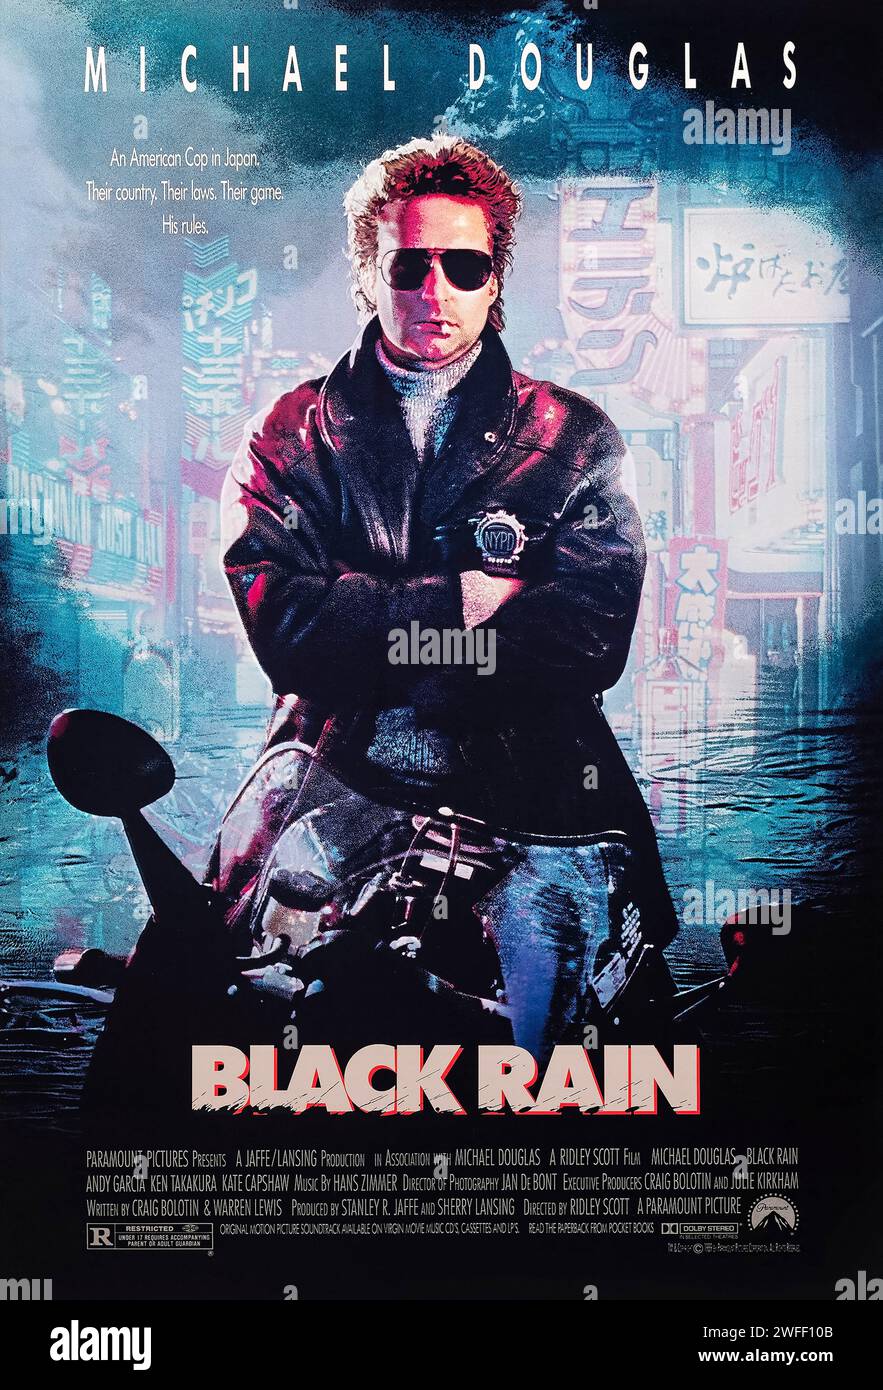 Black Rain (1989) directed by Ridley Scott and starring Michael Douglas, Andy Garcia and Ken Takakura. Two NYC cops arrest a Yakuza member and must escort him when he's extradited to Japan. Photograph of an original 1989 US one sheet poster. ***EDITORIAL USE ONLY*** Credit: BFA / Paramount Pictures Stock Photo